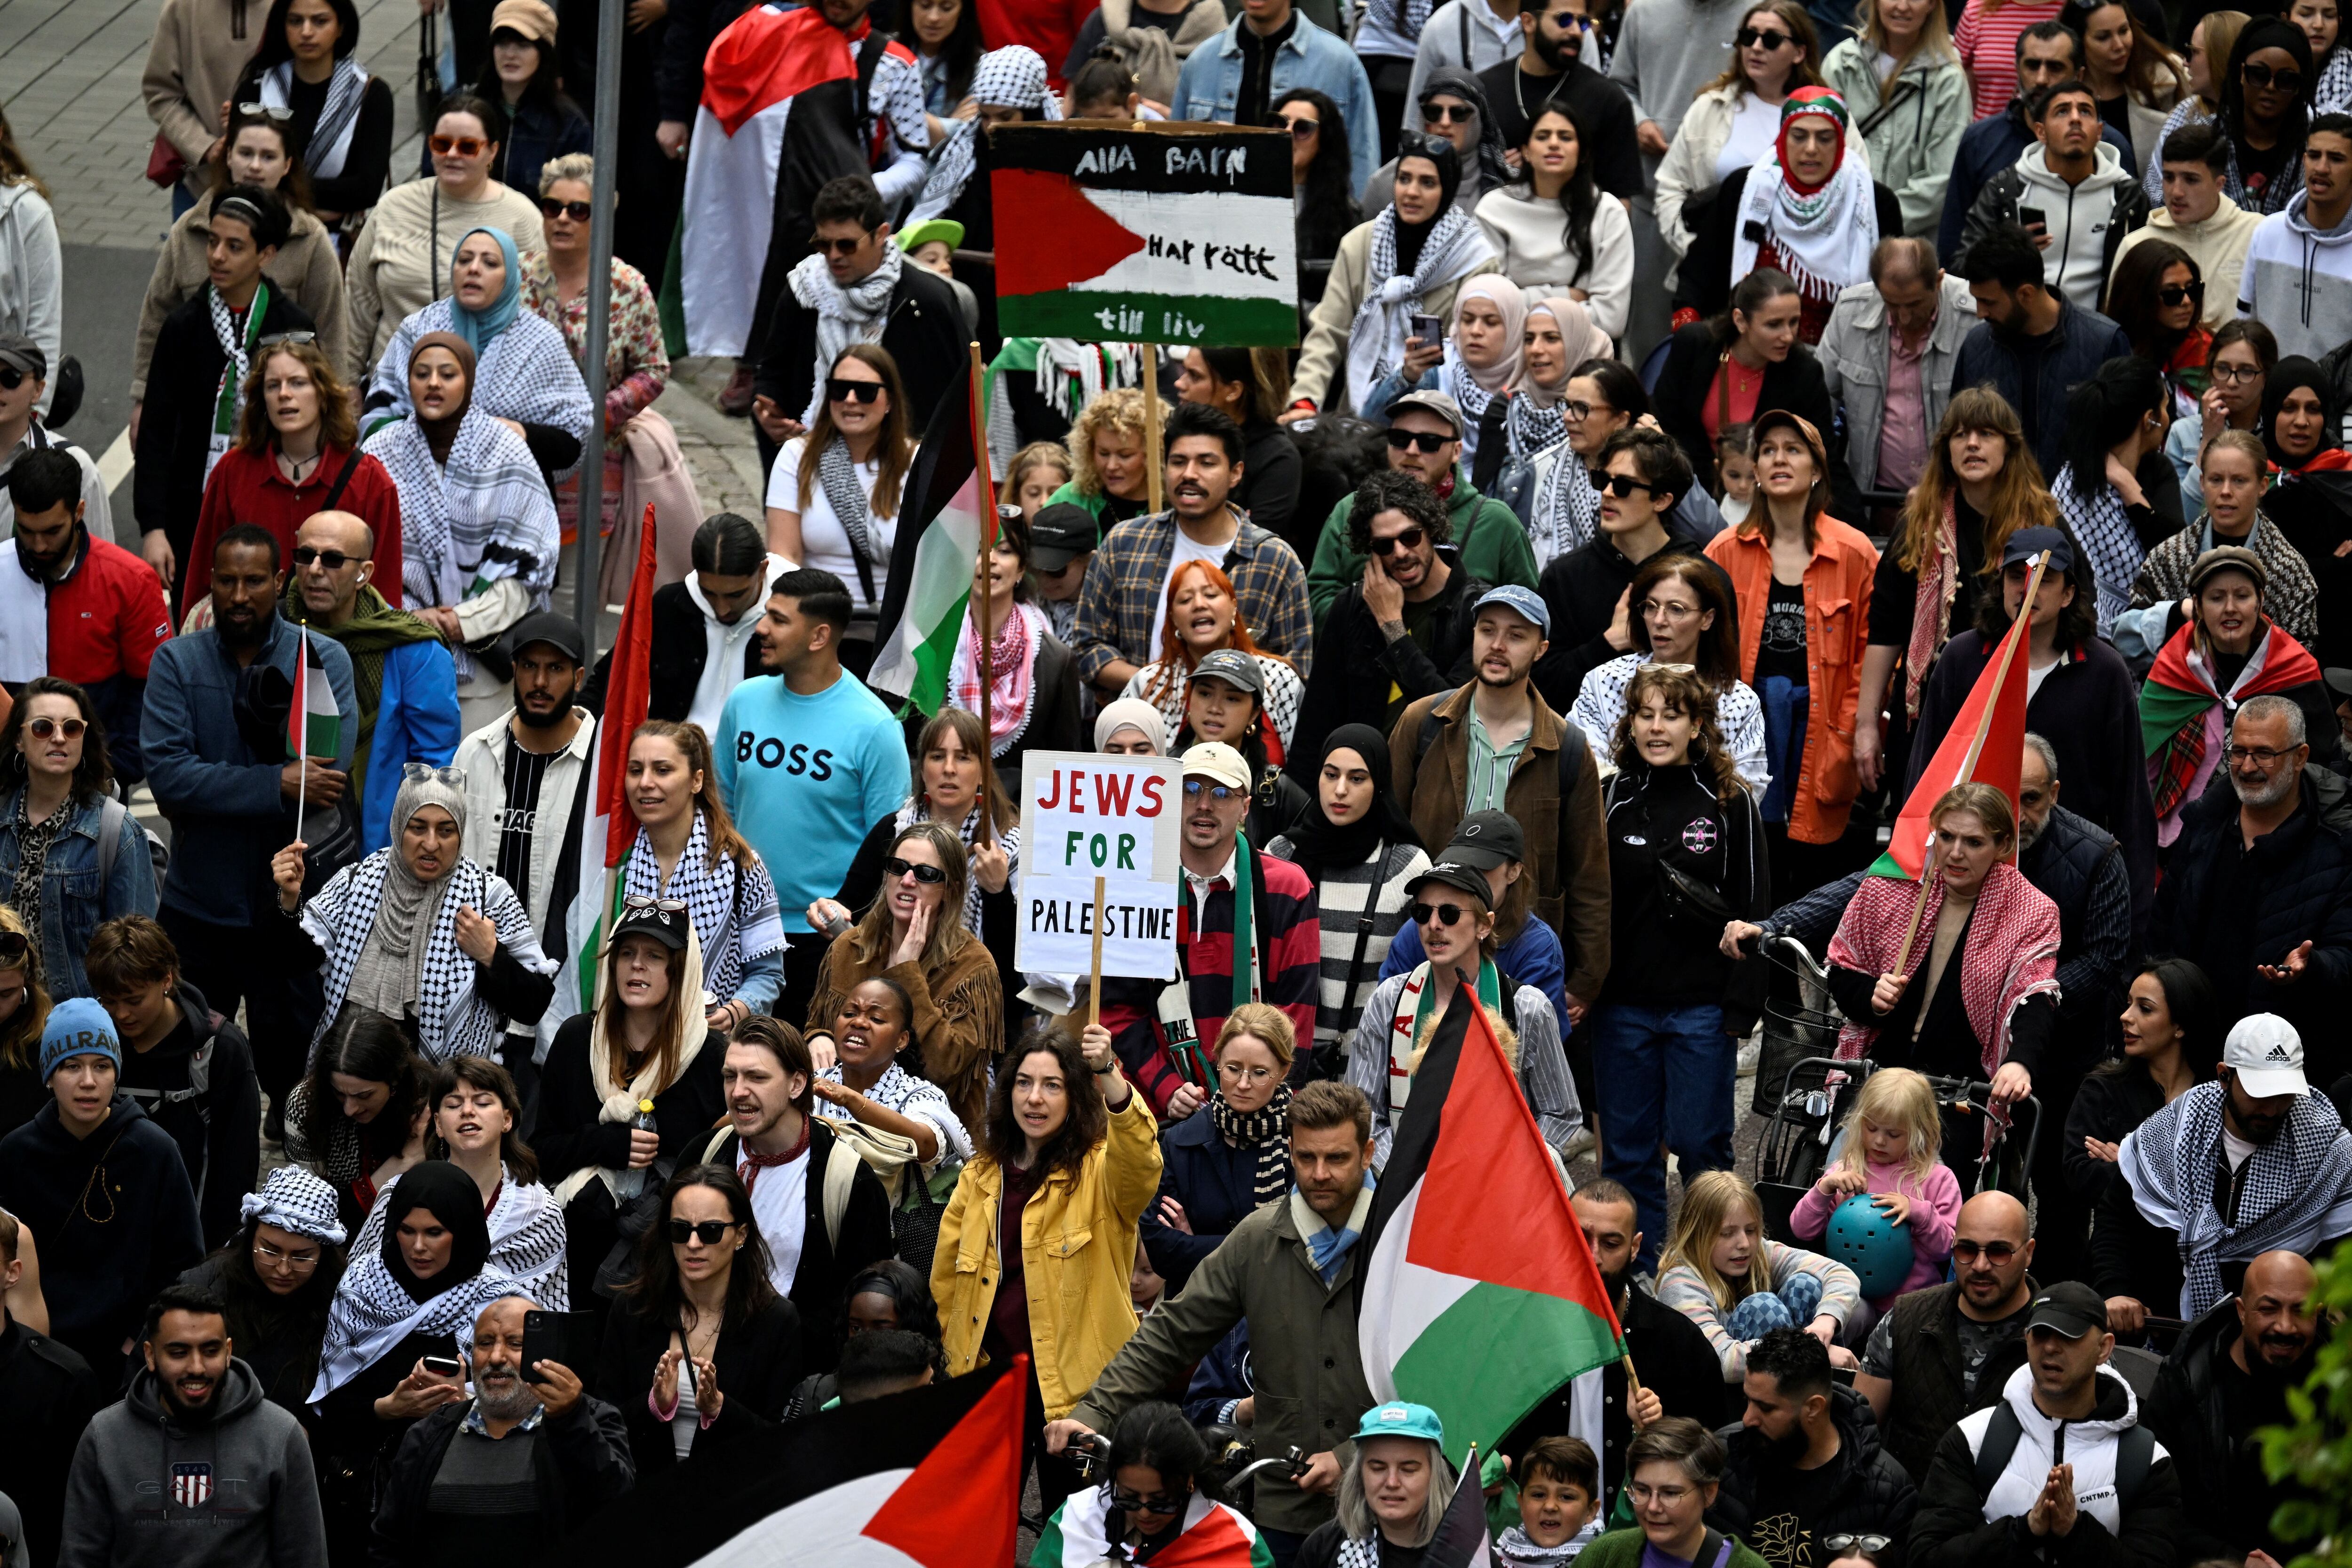 Protesters hold Palestinian flags and signs during the "Stop Israel" demonstration, against Israel's participation in the Eurovision Song Contest due to its ongoing offensive in Gaza against Hamas, in Malmo, Sweden, May 11, 2024. TT News Agency/Johan Nilsson via REUTERS ATTENTION EDITORS - THIS IMAGE WAS PROVIDED BY A THIRD PARTY. SWEDEN OUT. NO COMMERCIAL OR EDITORIAL SALES IN SWEDEN.